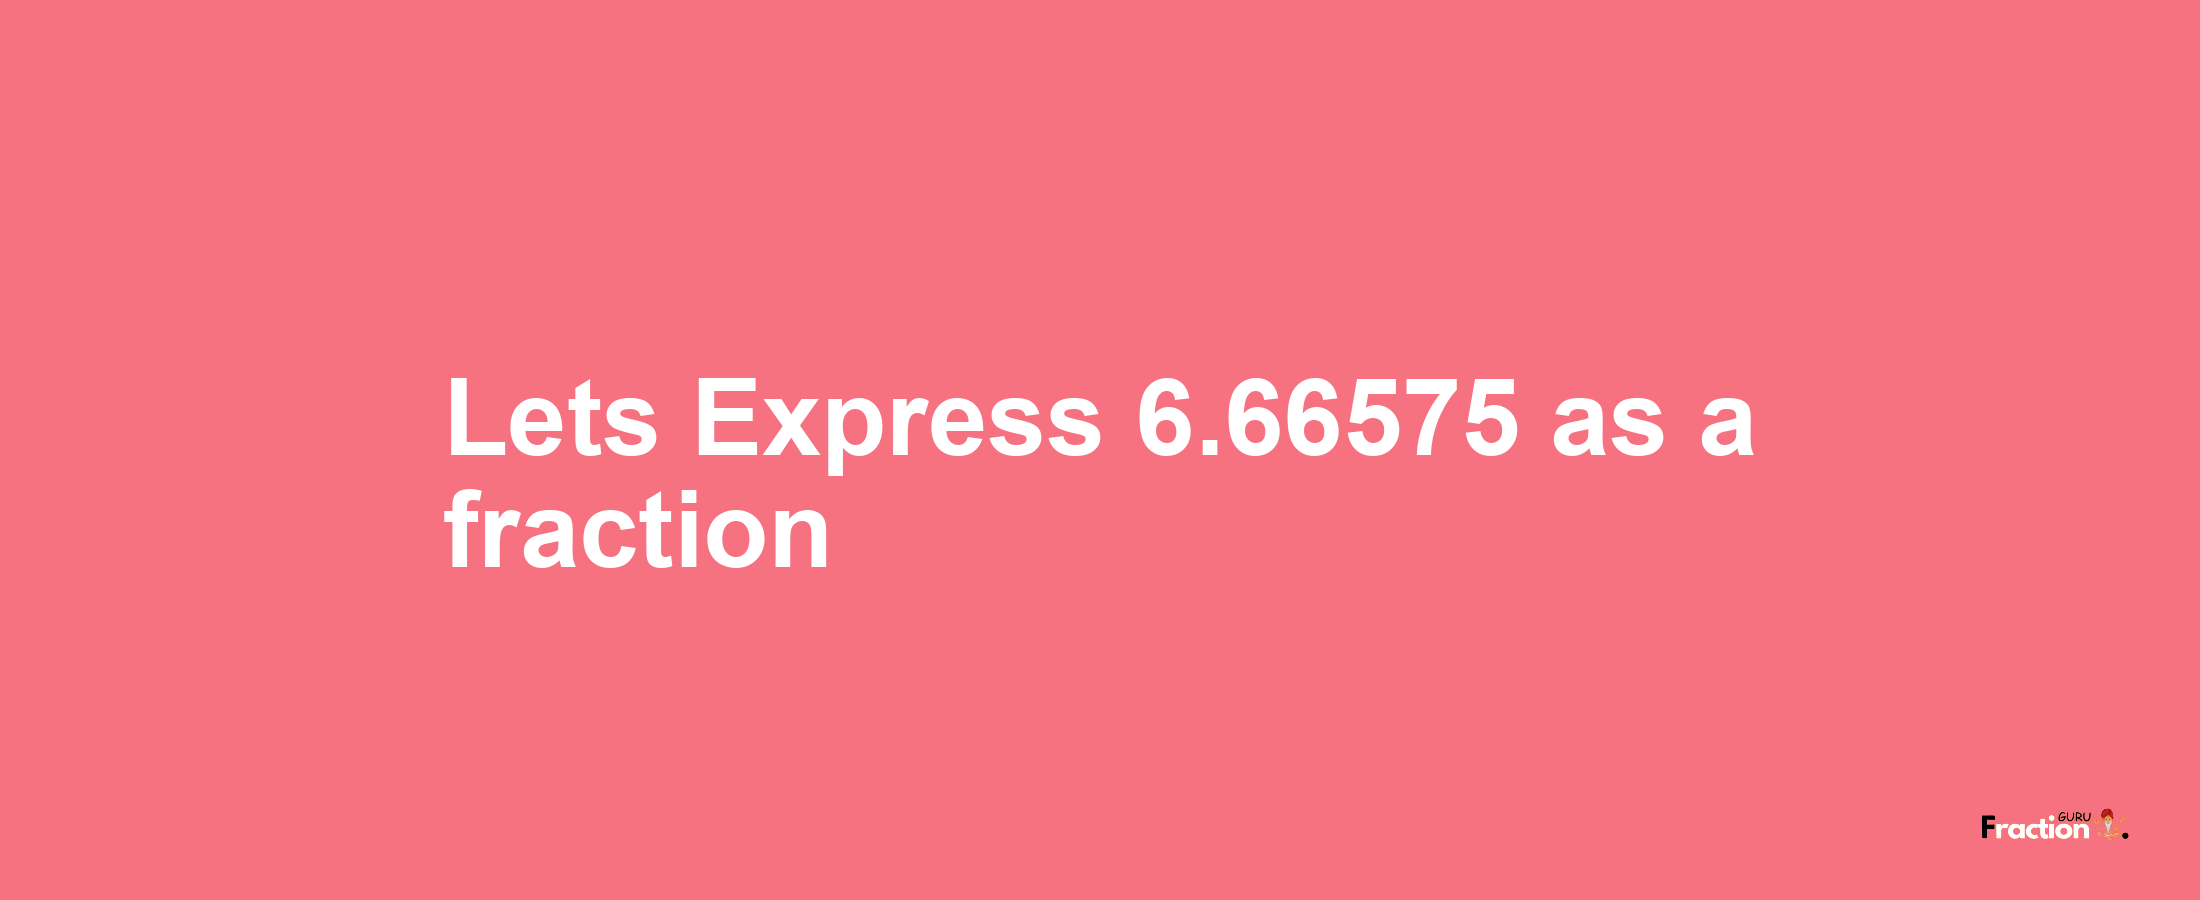 Lets Express 6.66575 as afraction